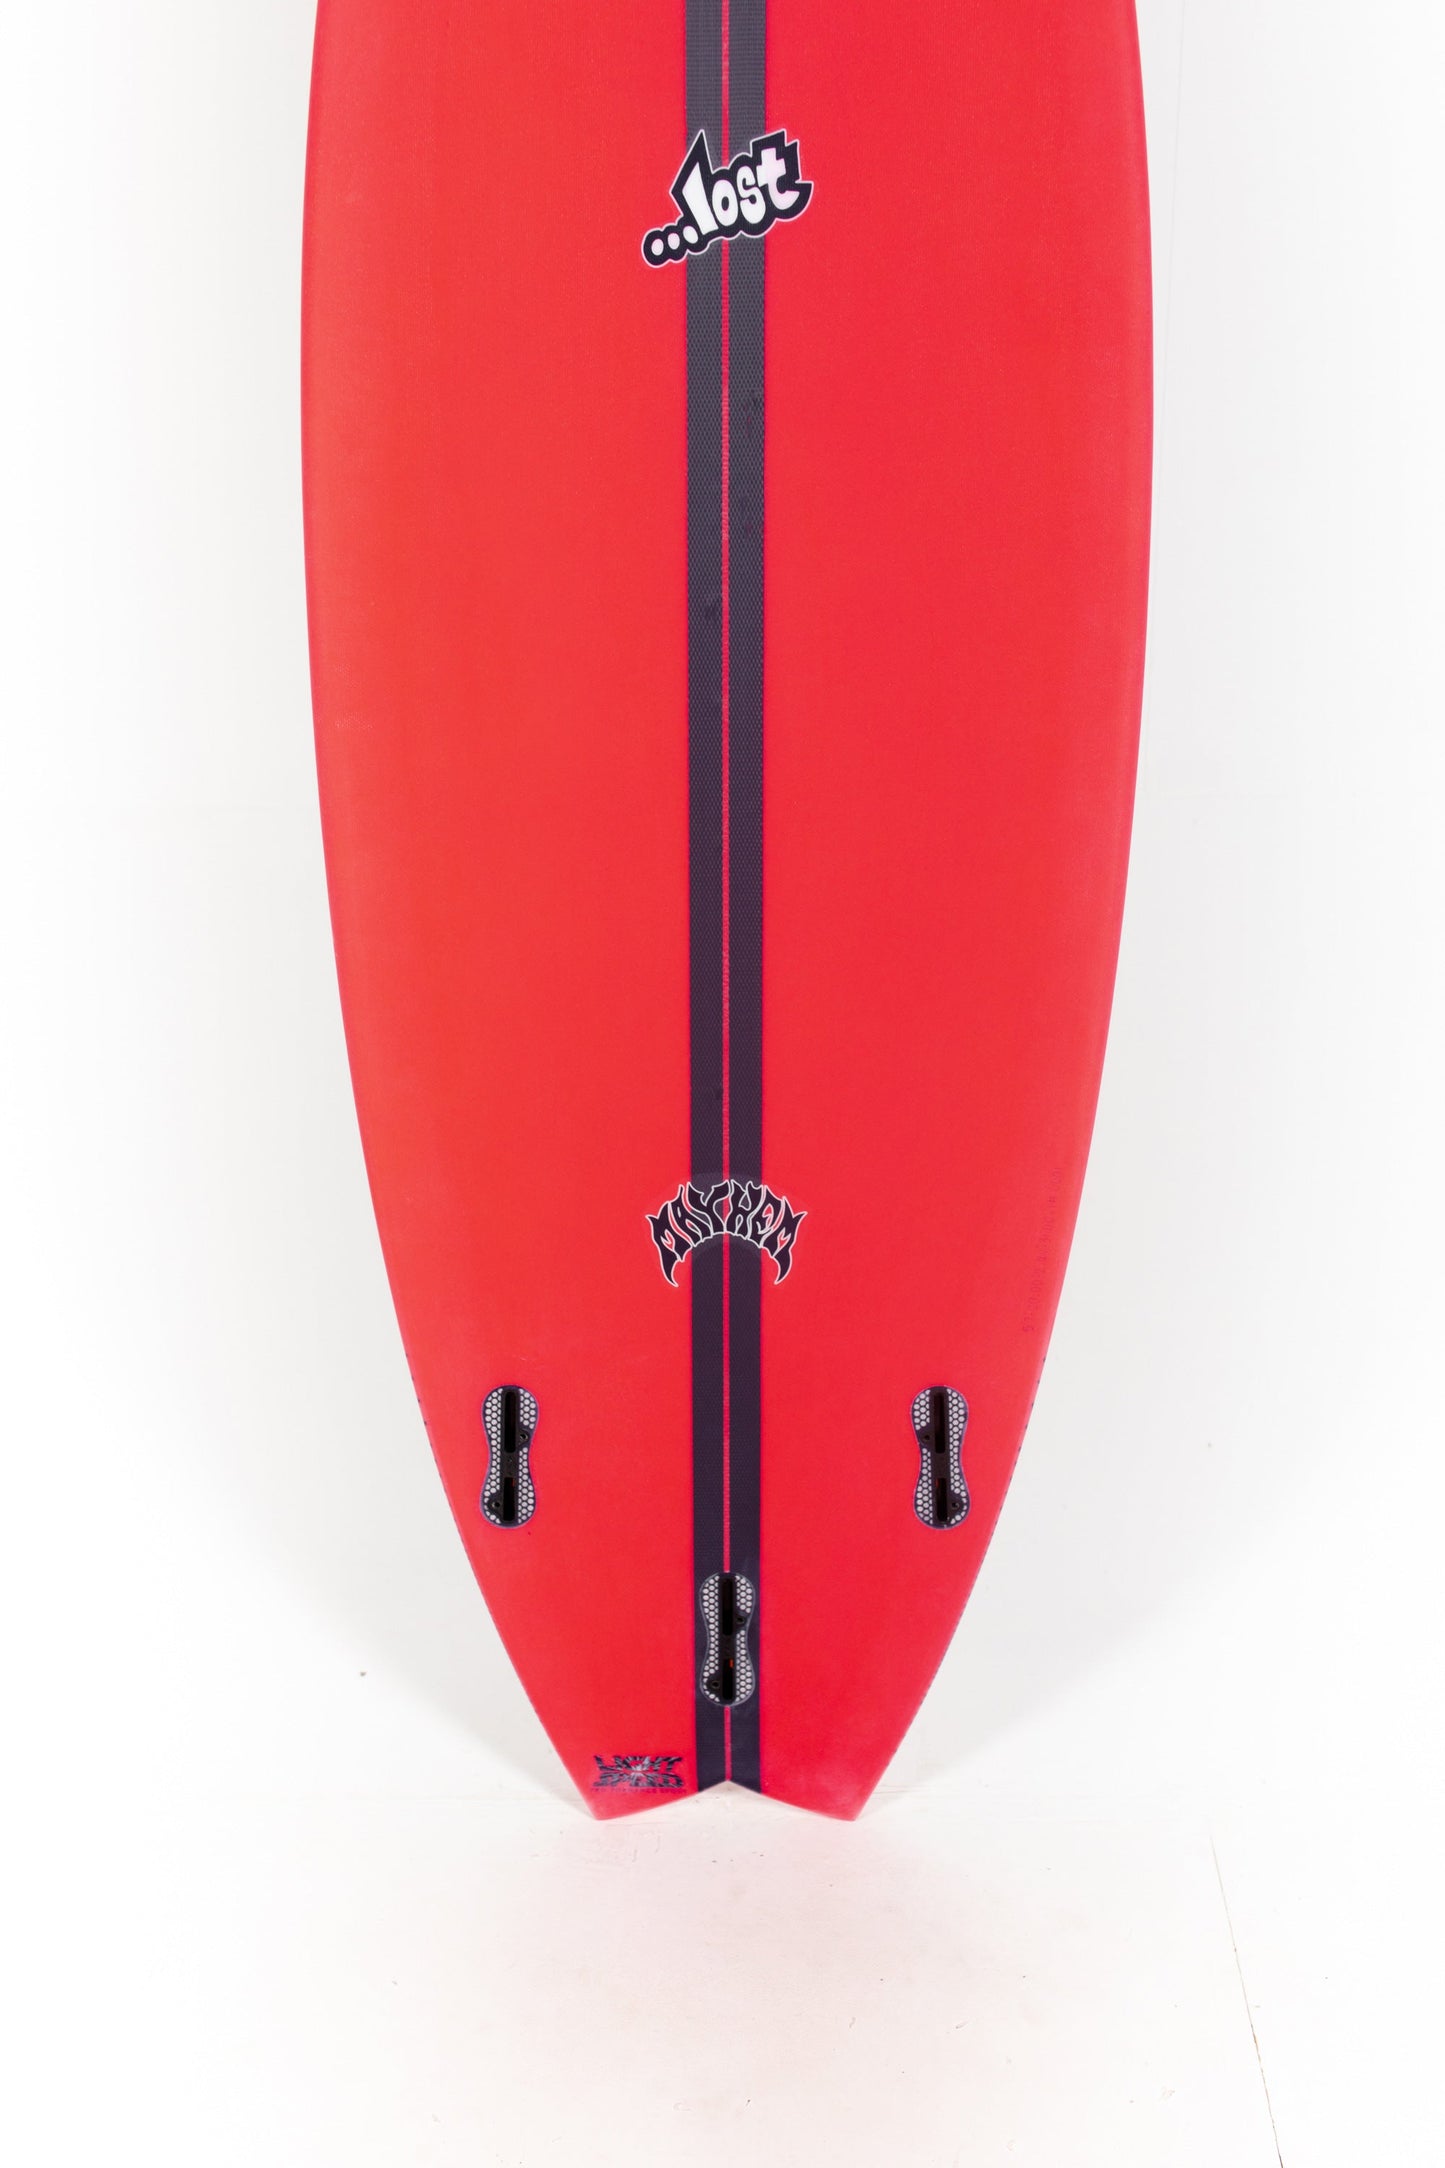 Lost SurfboardS RNF96 5'7